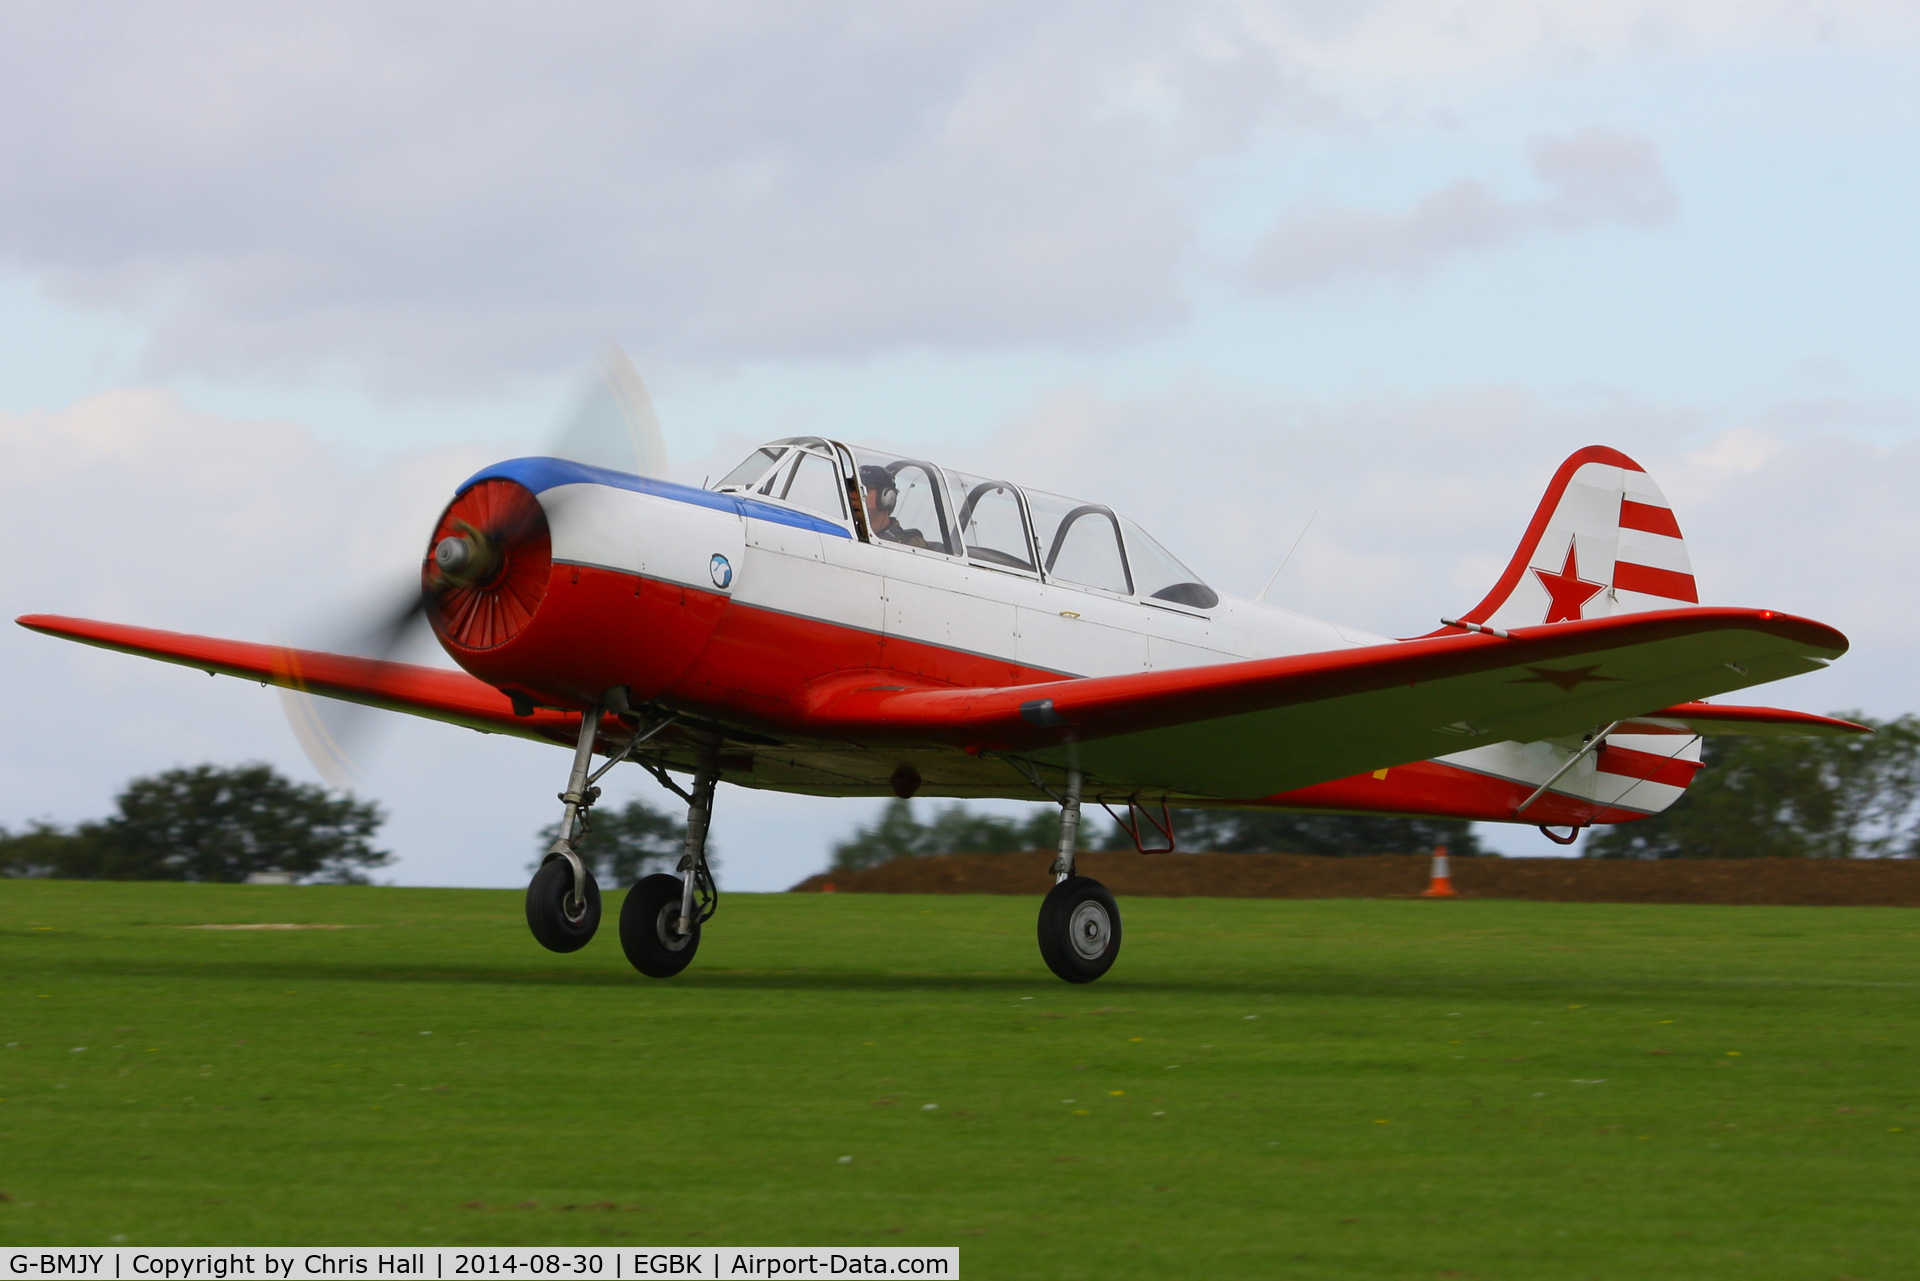 G-BMJY, 1964 Yakovlev Yak C-18A C/N 627, at the LAA Rally 2014, Sywell